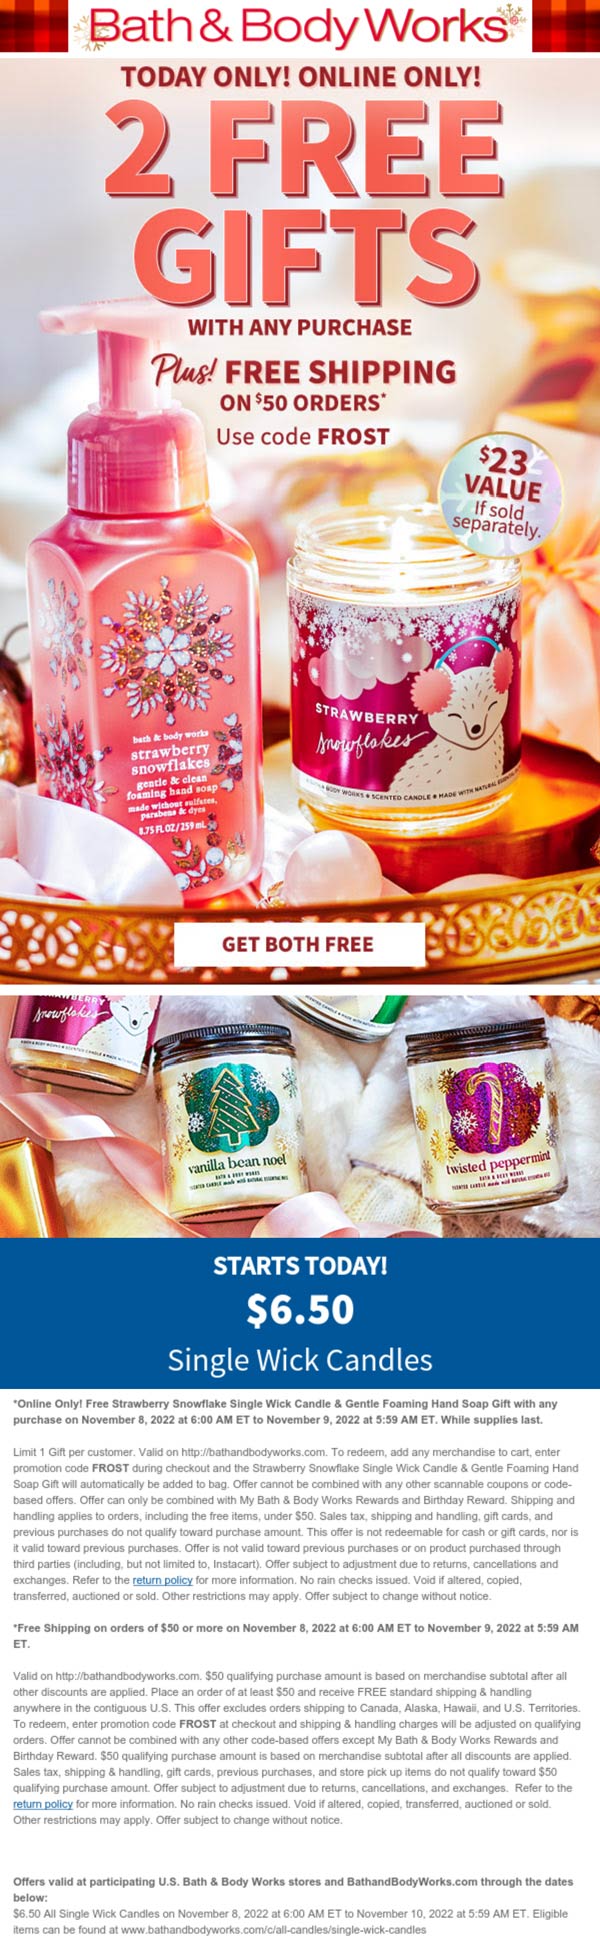 Bath & Body Works stores Coupon  2 free gifts with any purchase today at Bath & Body Works via promo code FROST #bathbodyworks 